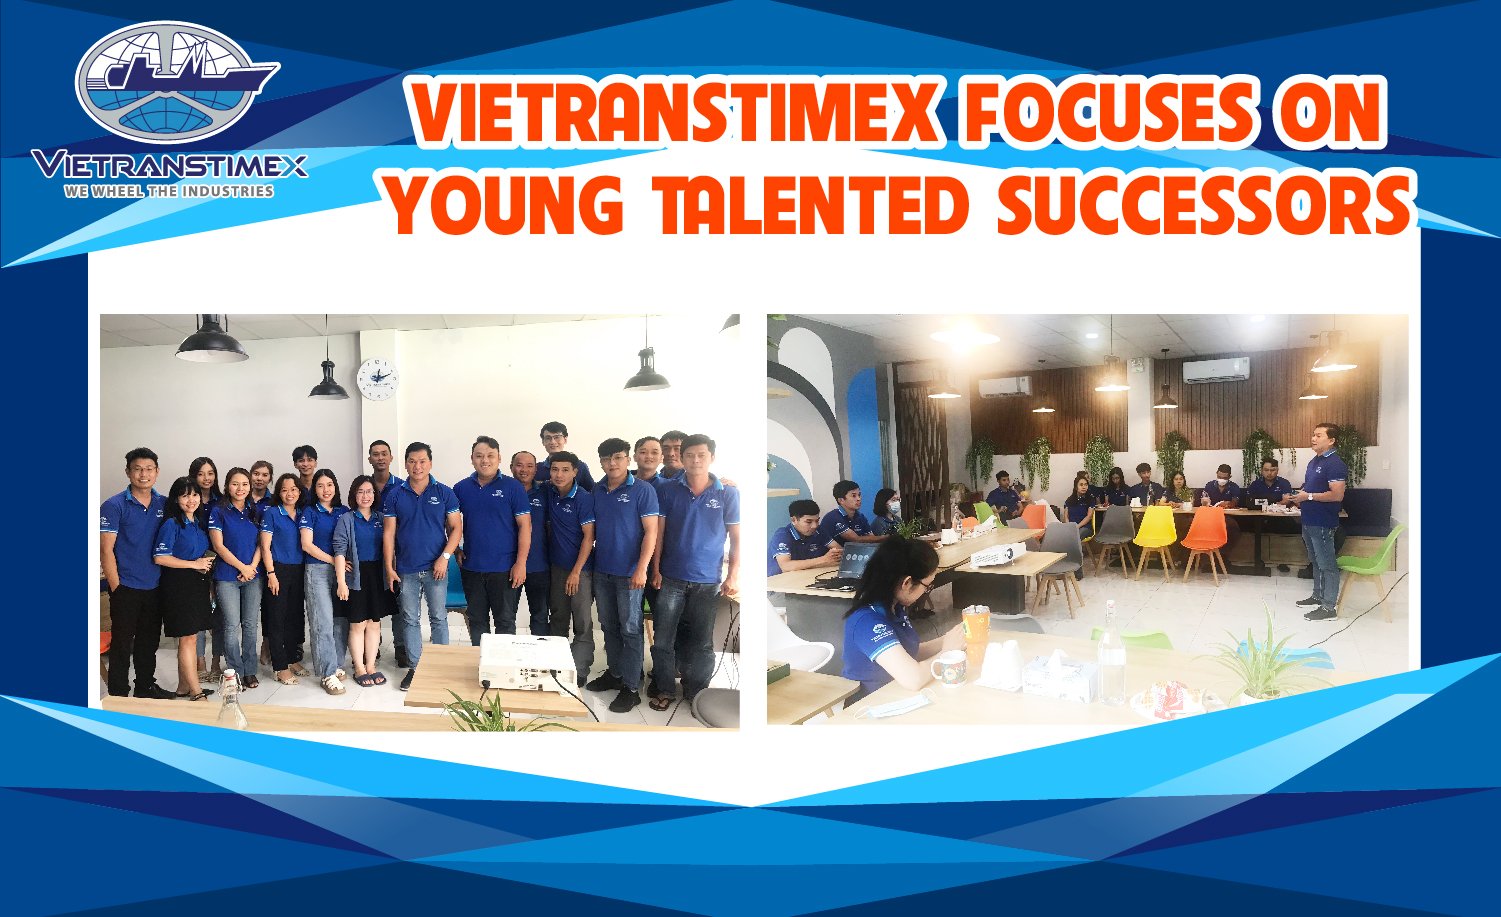 Vietranstimex Focuses On Young Talented Successors